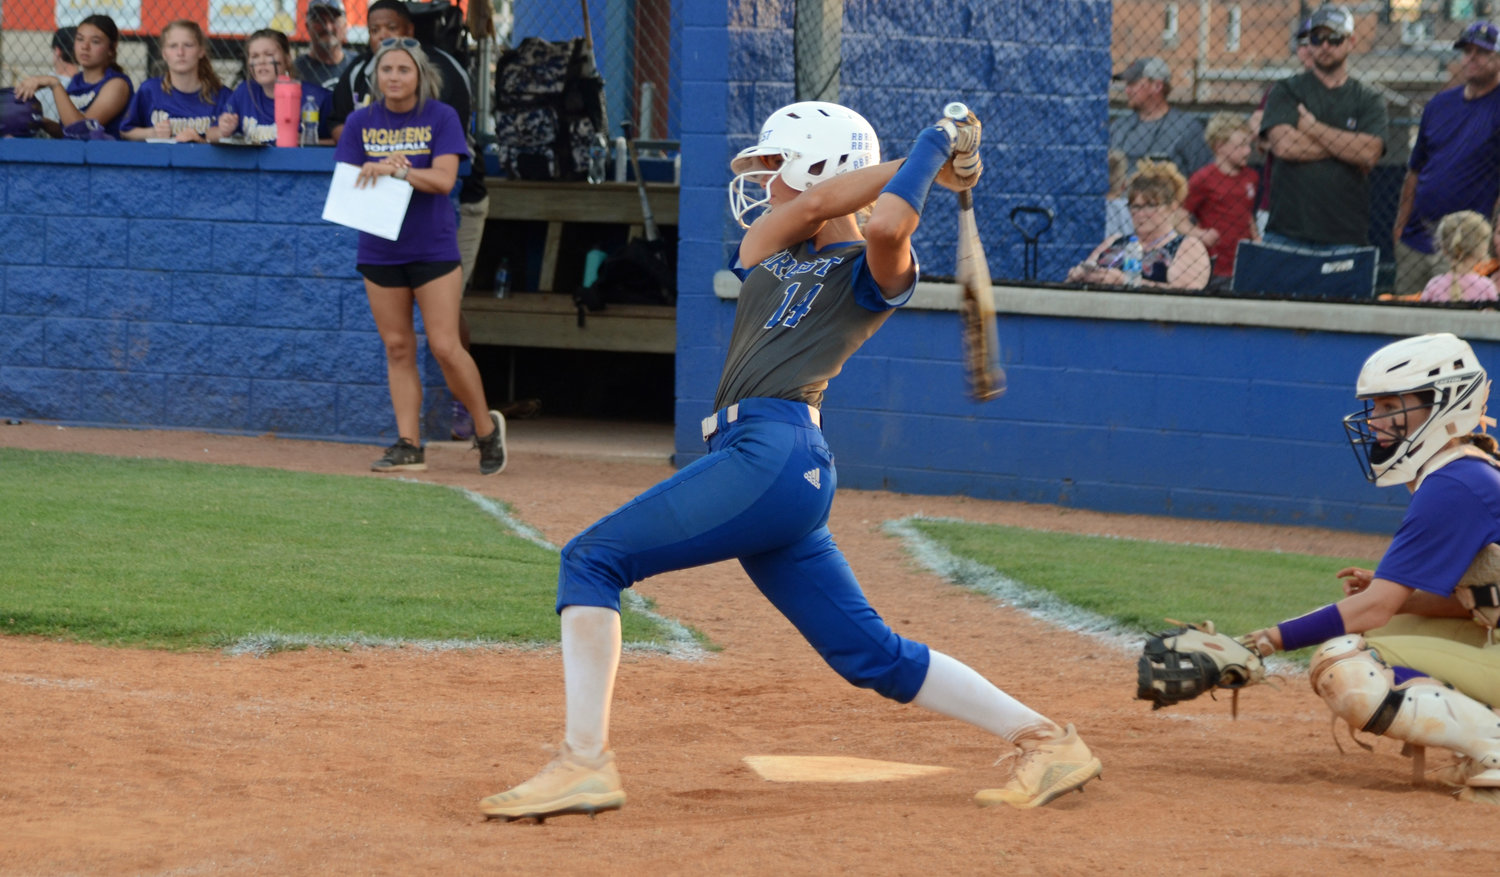 Briley Burnham went 3-for-4 in the Lady Rockets’ big 14-6 win over Community.